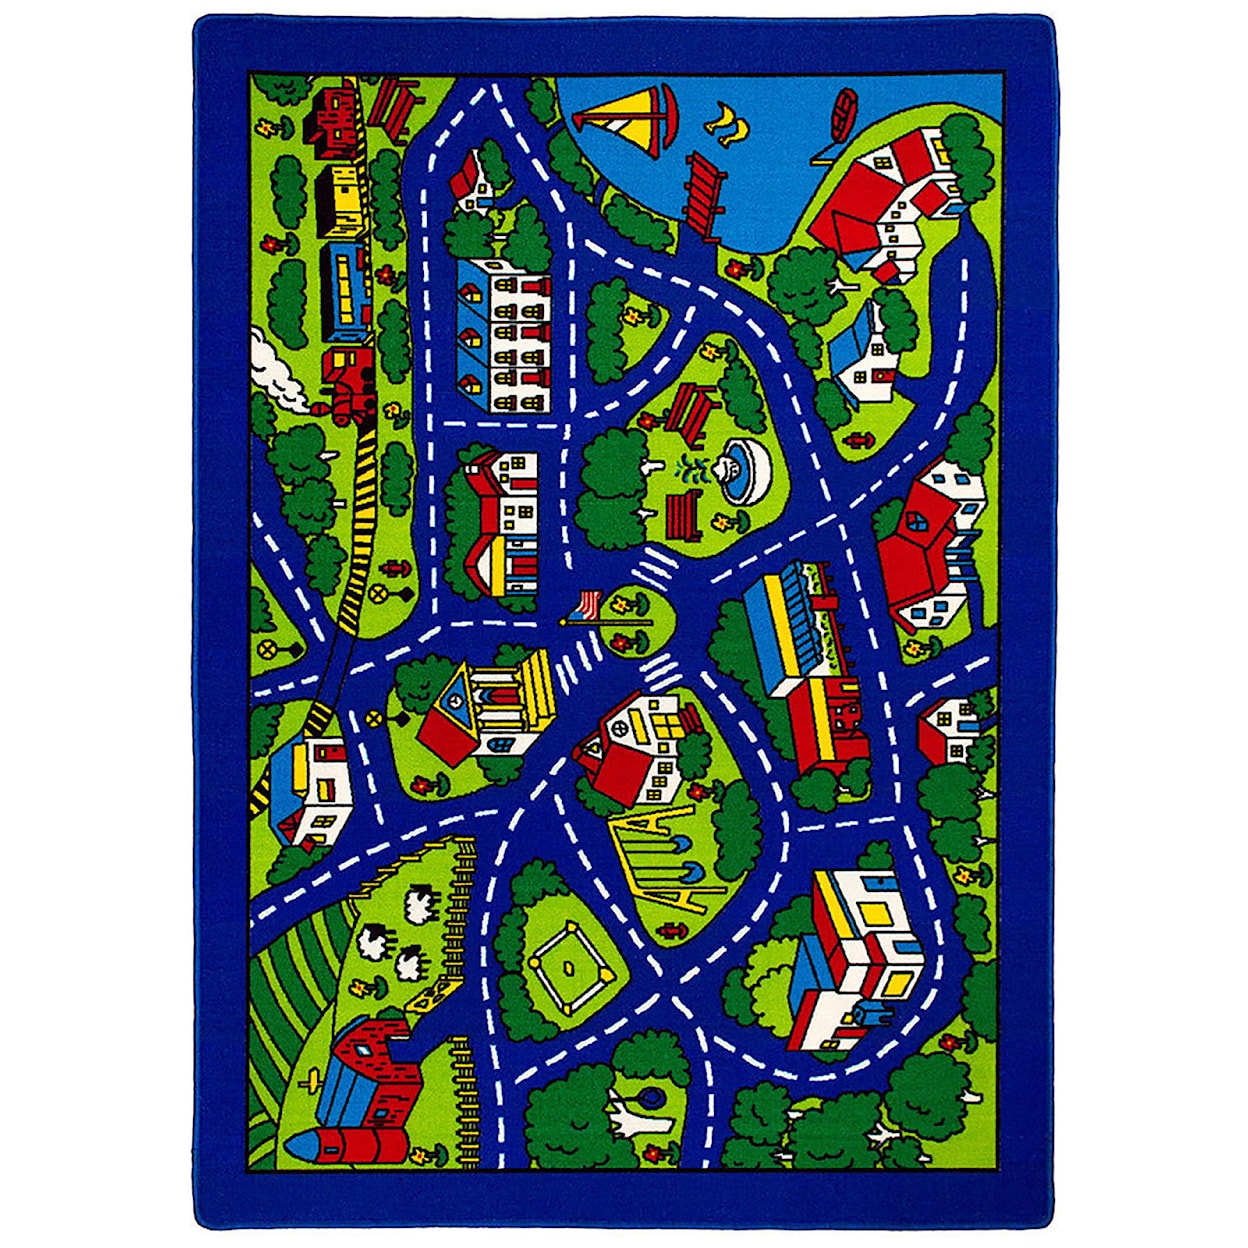 Furniture of America Furniture of America 5 X 8 ROAD MAP RUG |